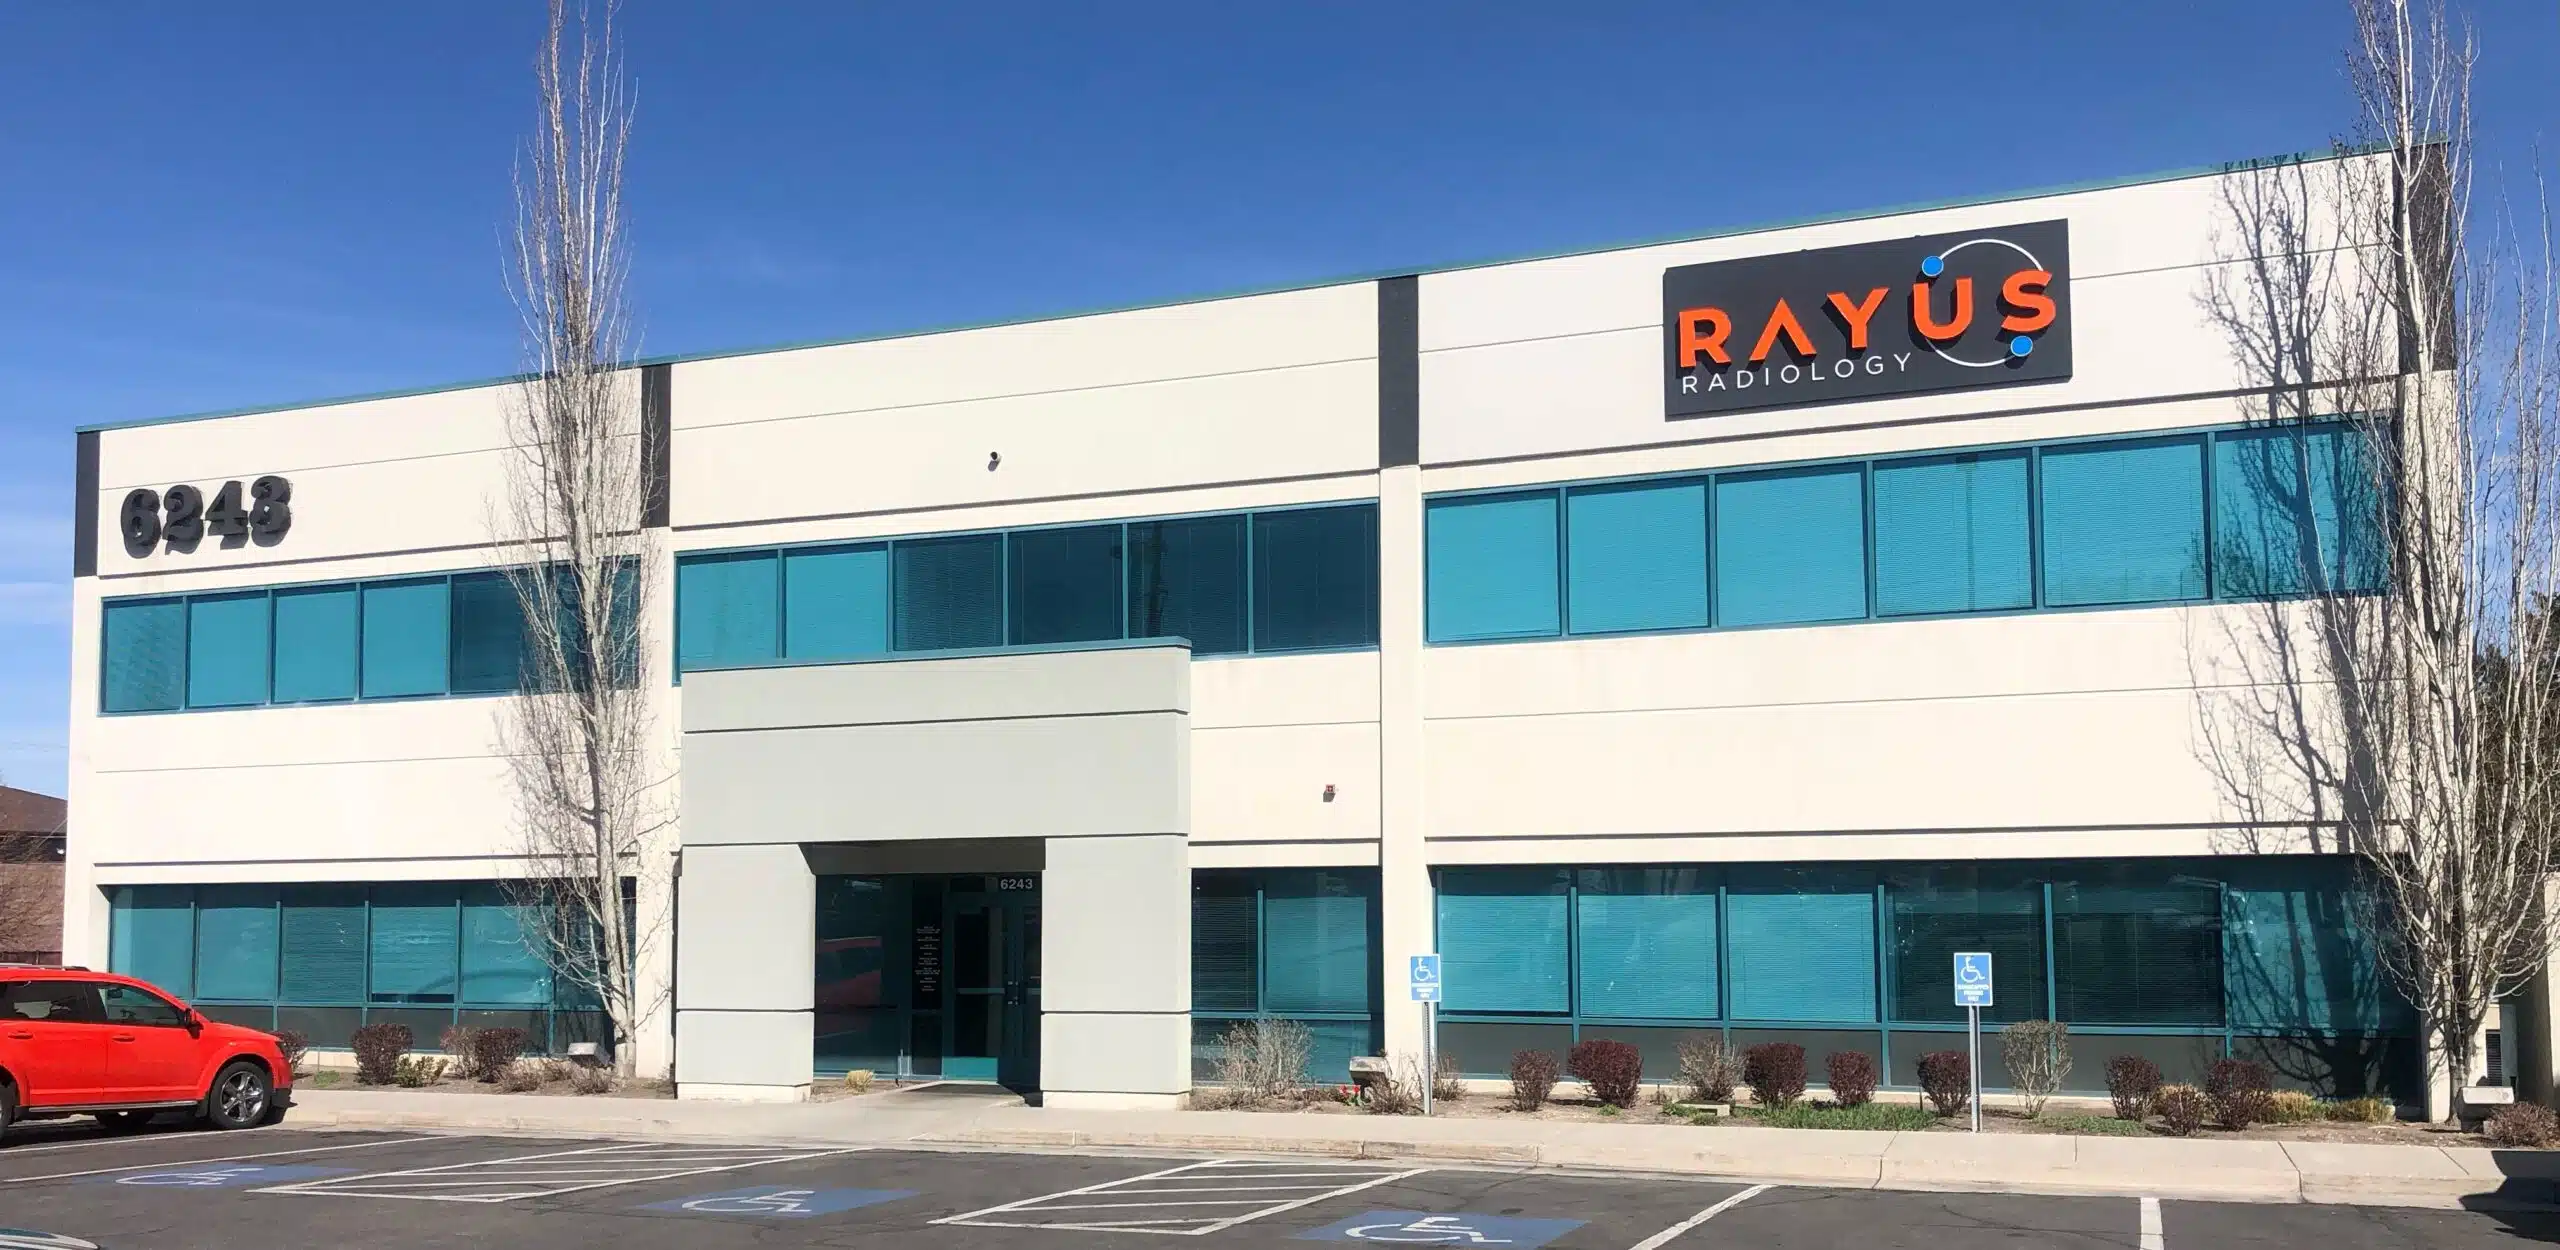 RAYUS Radiology diagnostic imaging center in 6243 S. Redwood Rd, Suite 130, Taylorsville, UT 84123